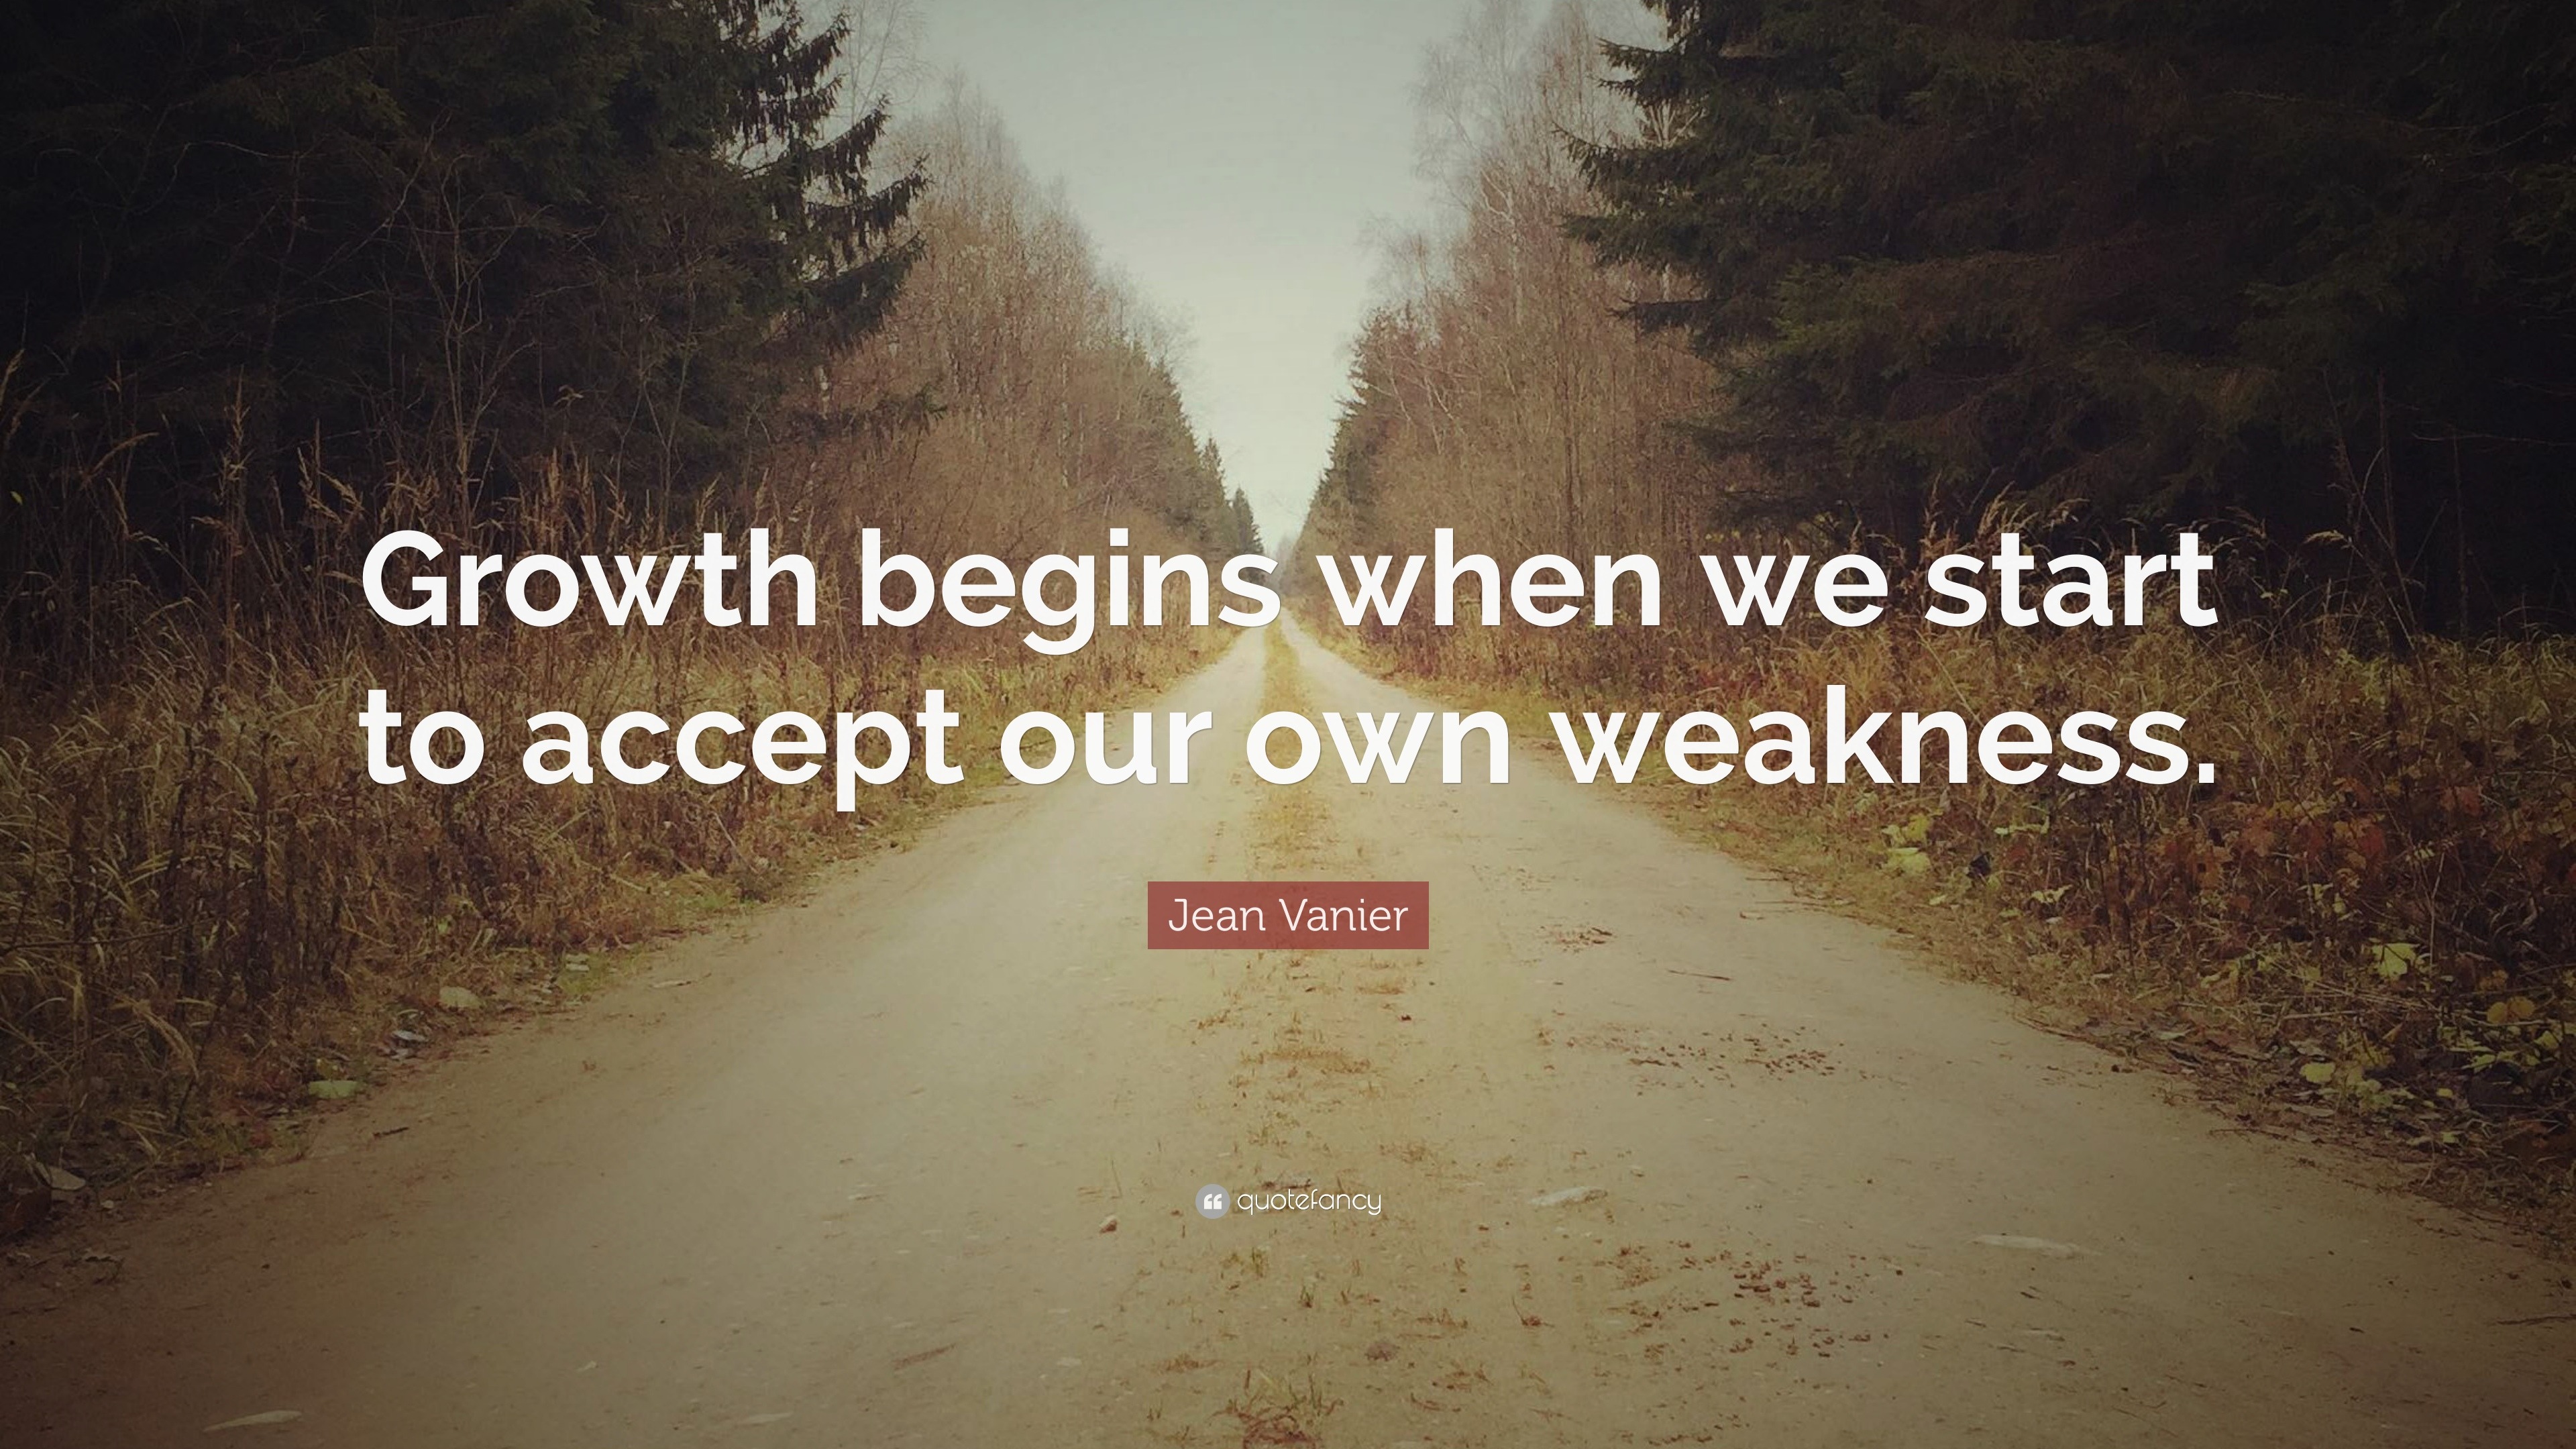 Community And Growth by Jean Vanier